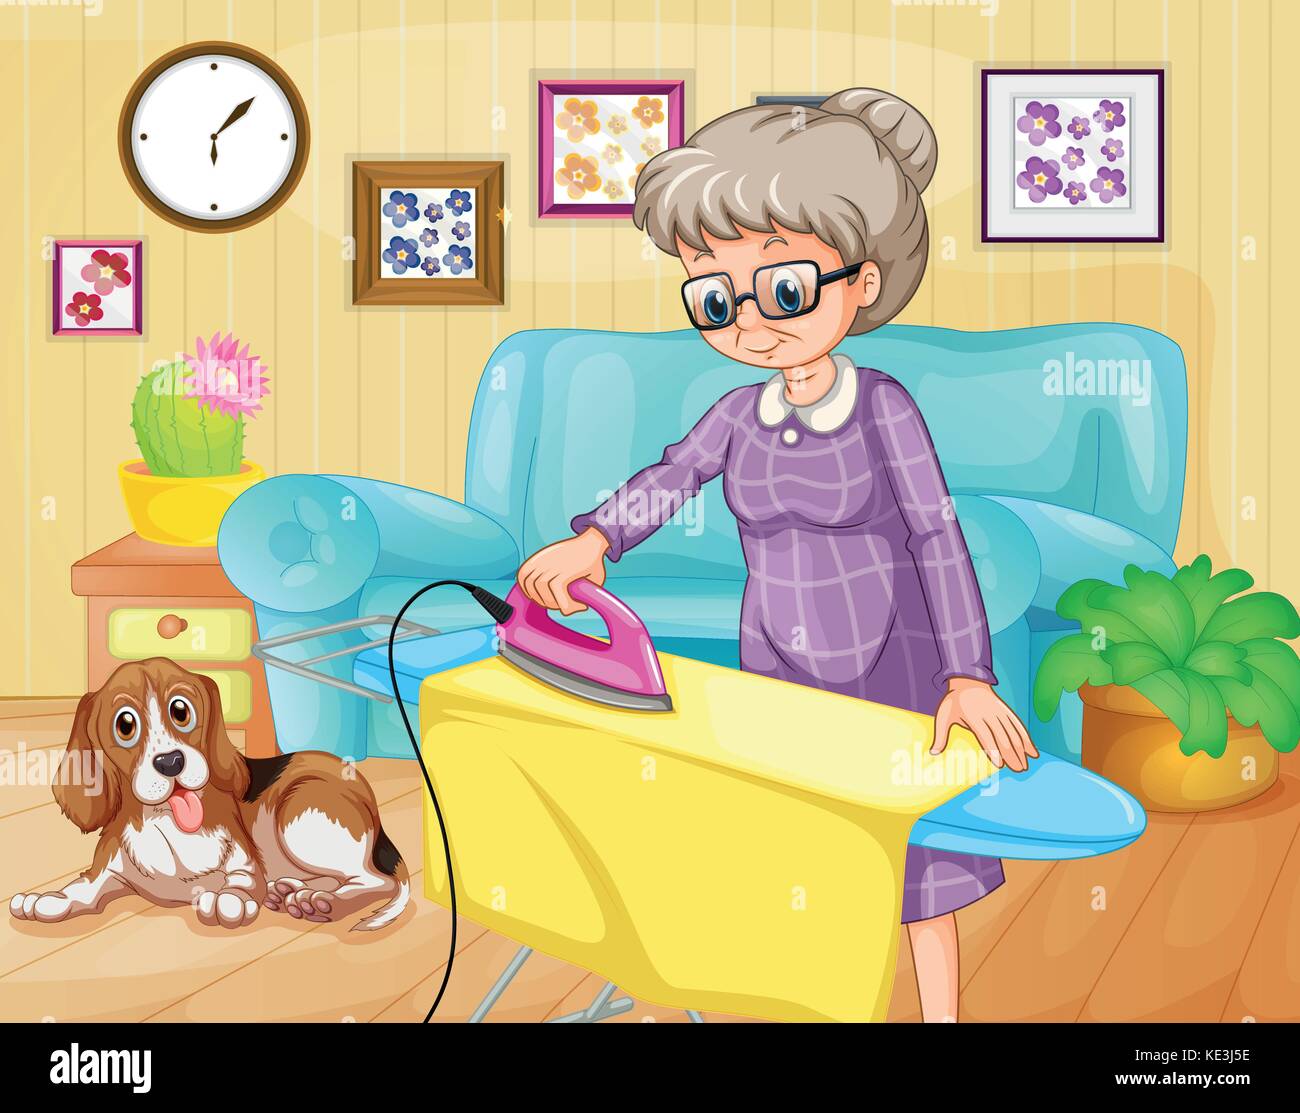 Old woman ironing clothes in a room illustration Stock Vector